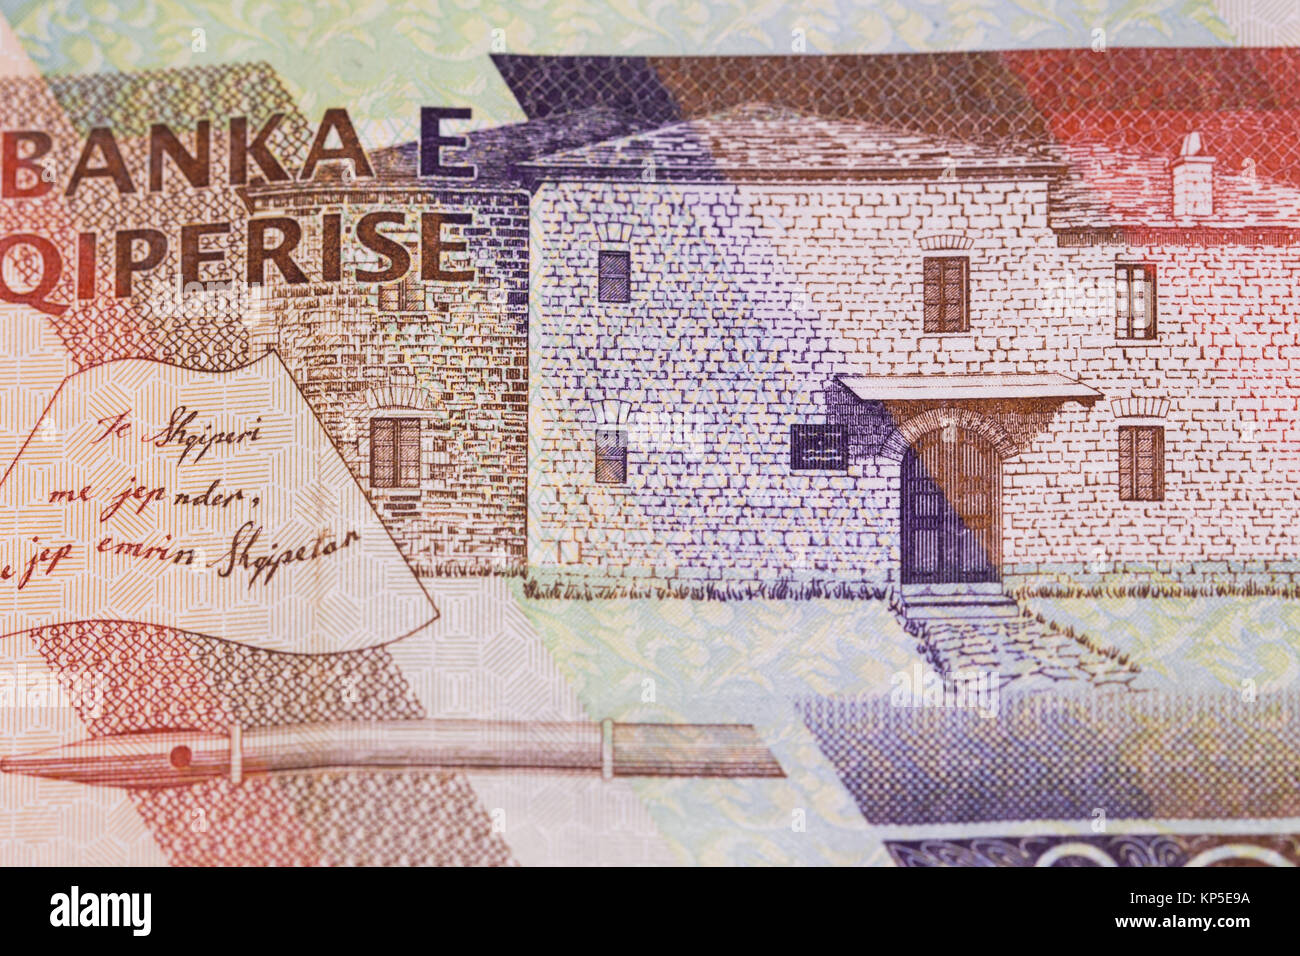 Reverse of Albanian currency Lek banknote of 200 denomination depicting